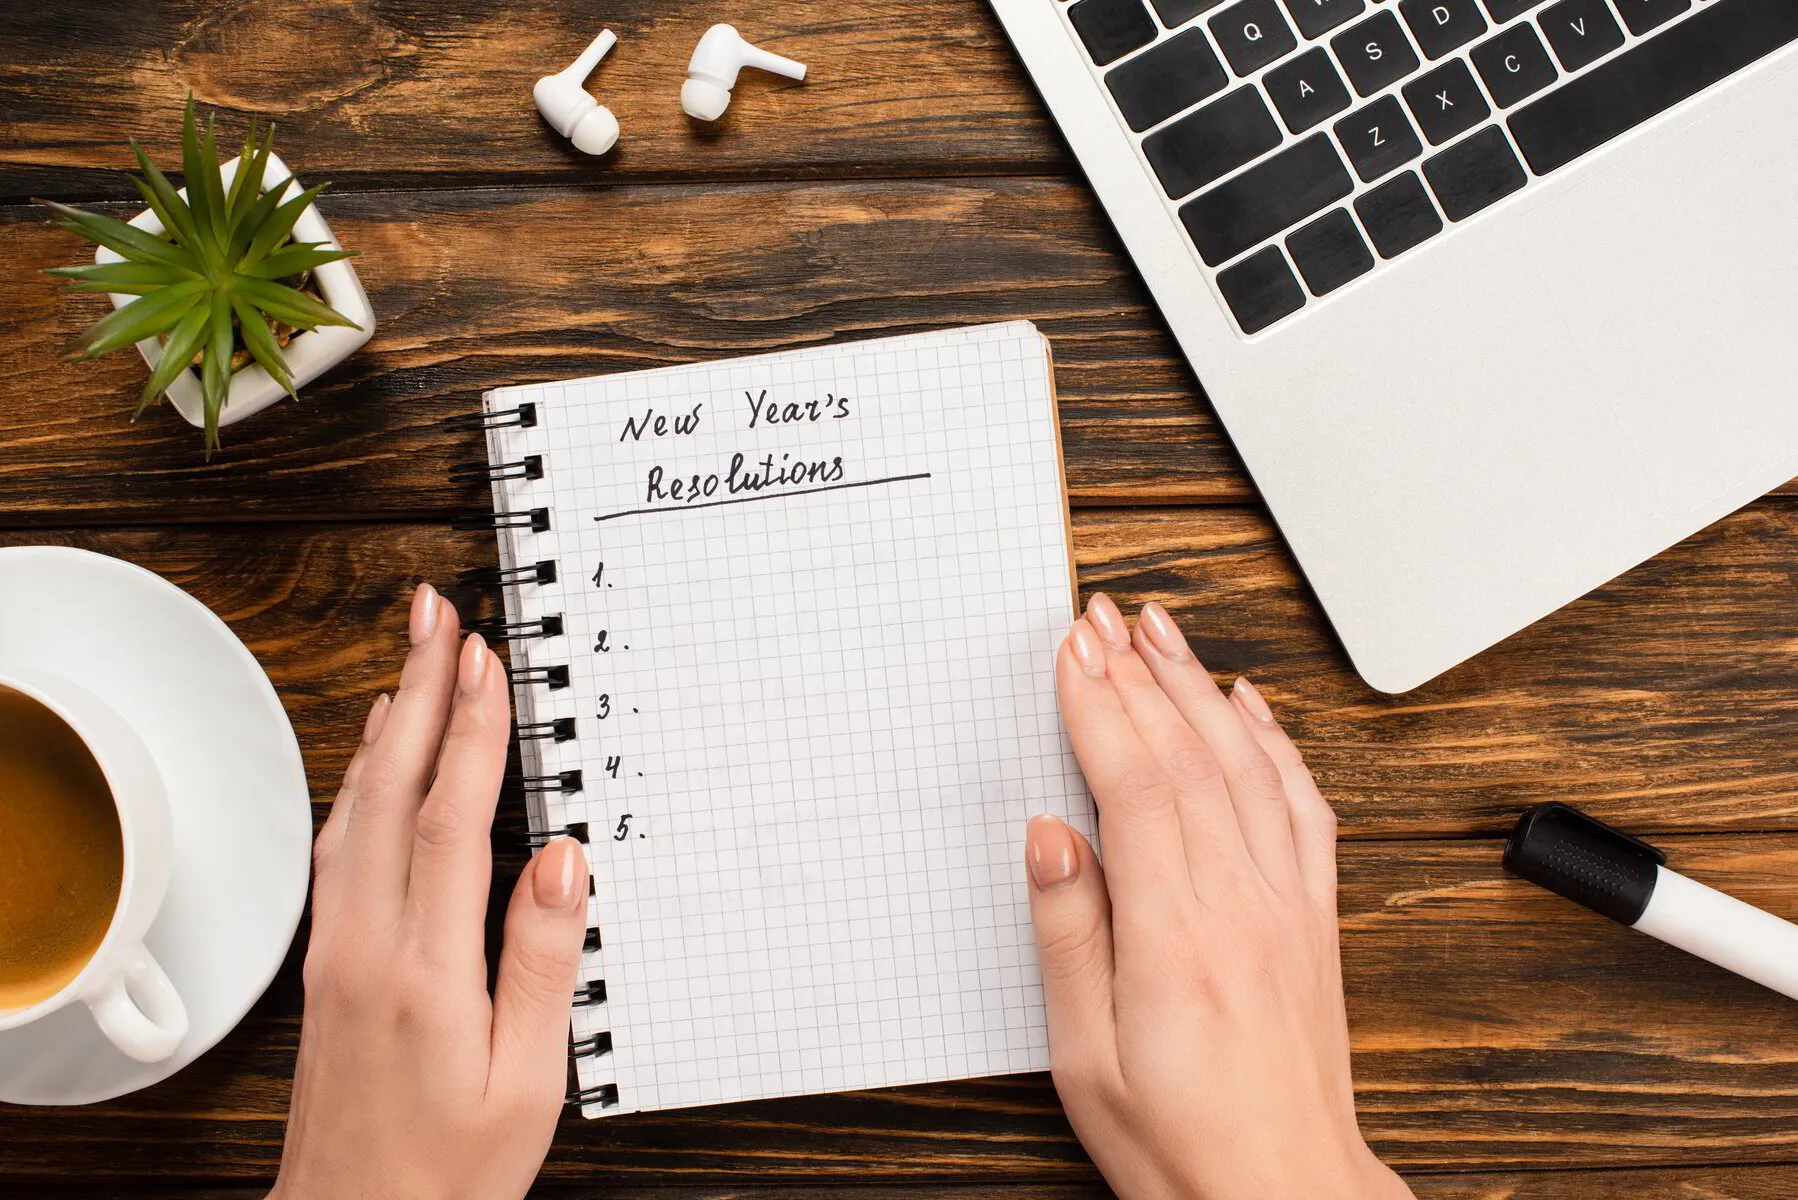 Your Resolutions Will Fail Without This 1 Simple Thing